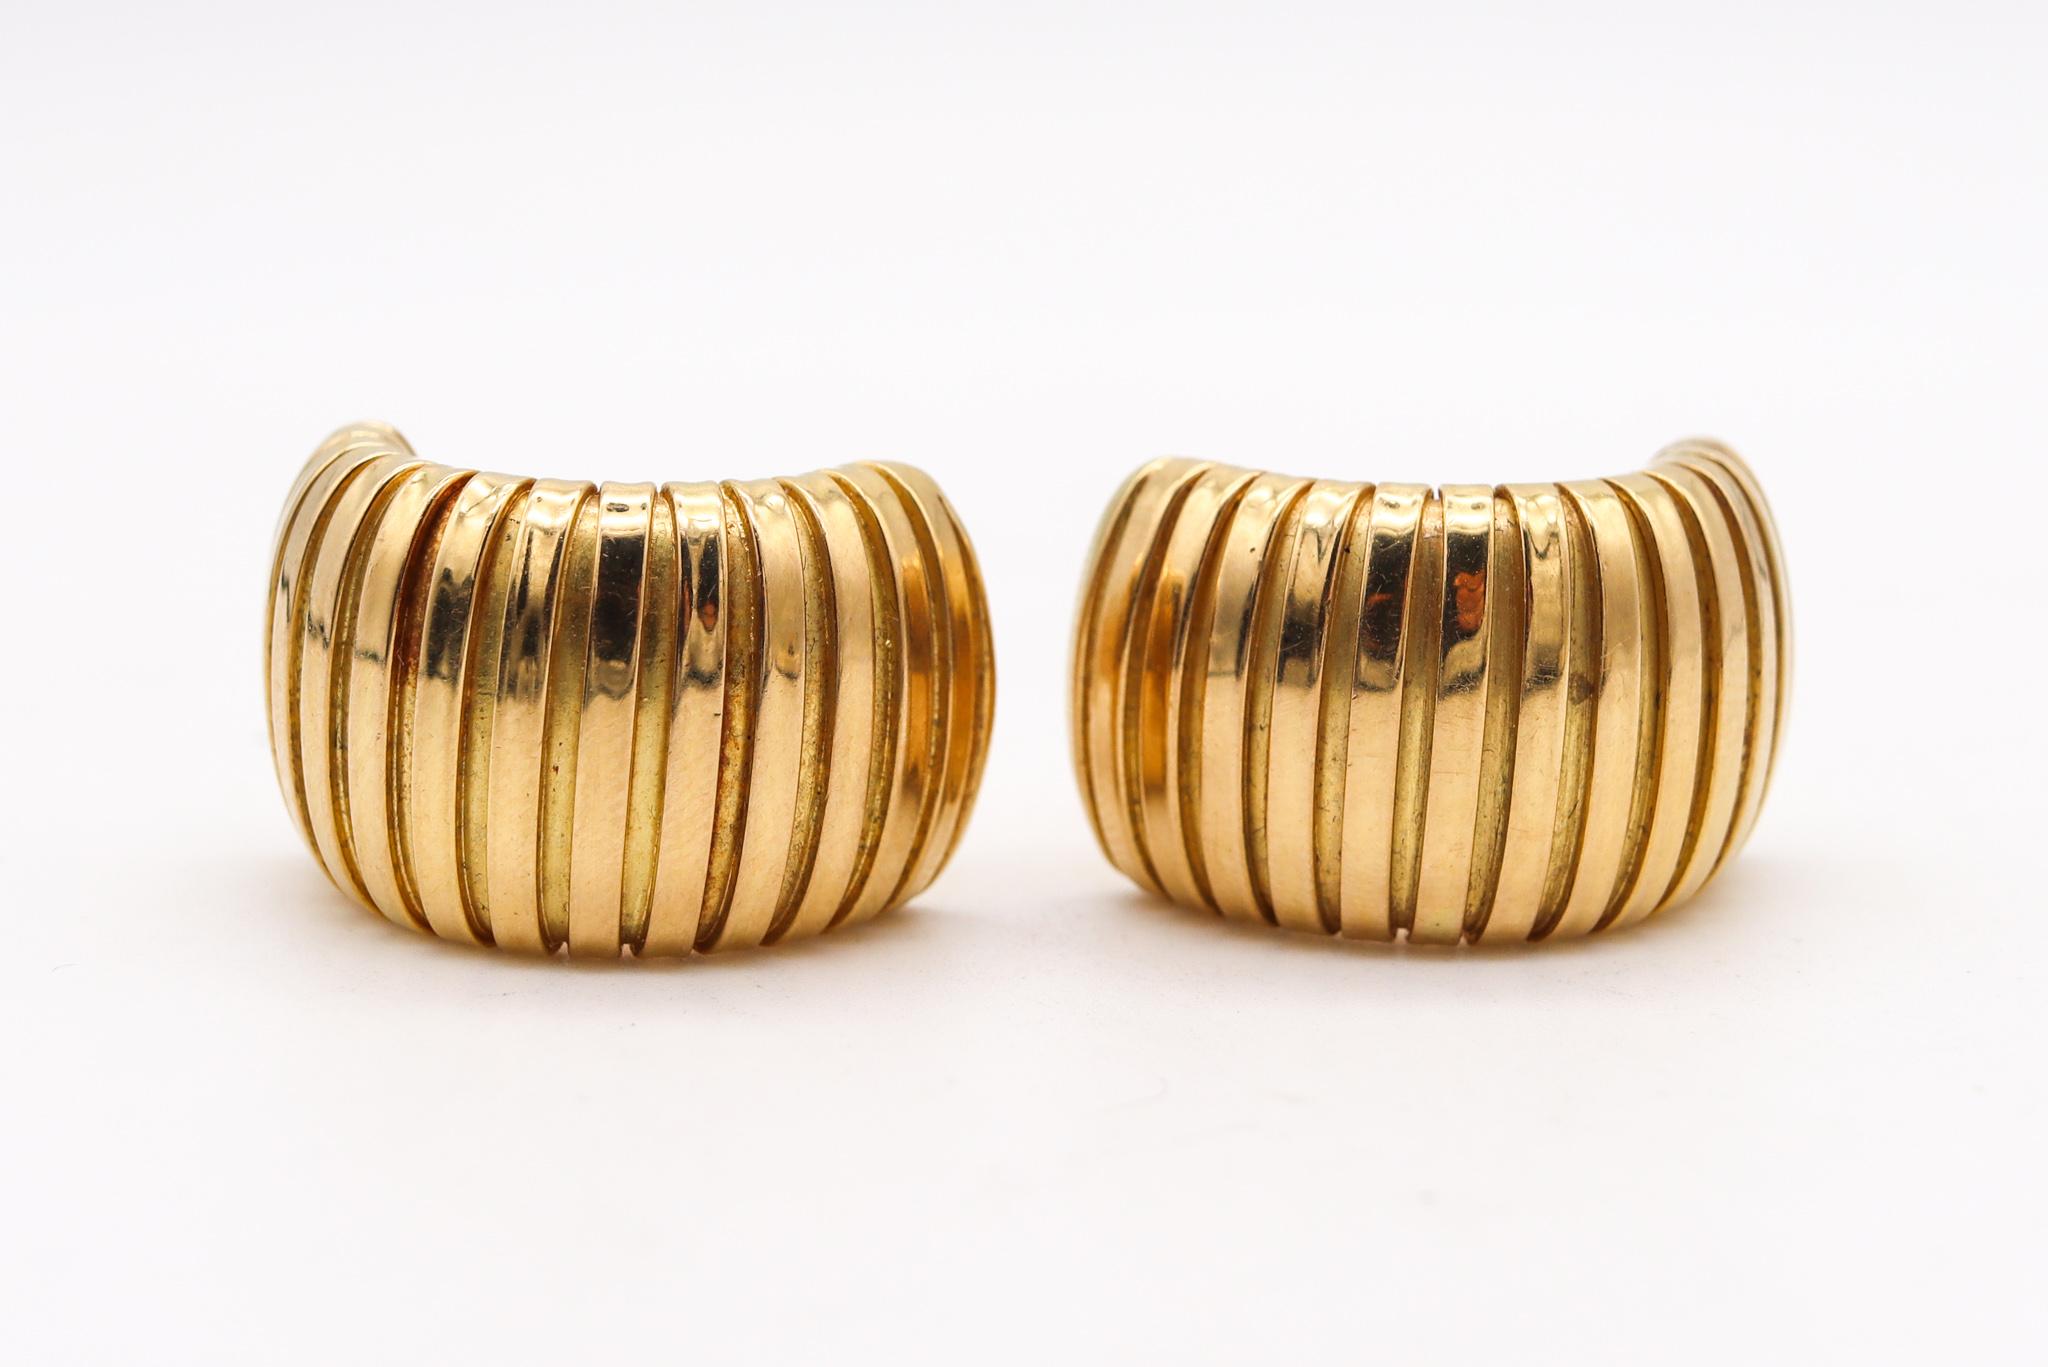 Clips earrings designed by Carlo Weingrill.

Beautiful elegant pair, created in Verona Italy at the jewelry atelier of Carlo Weingrill, back in the late 1970. This pair of earrings has been crafted with the tubogas flexible pipe patterns in solid